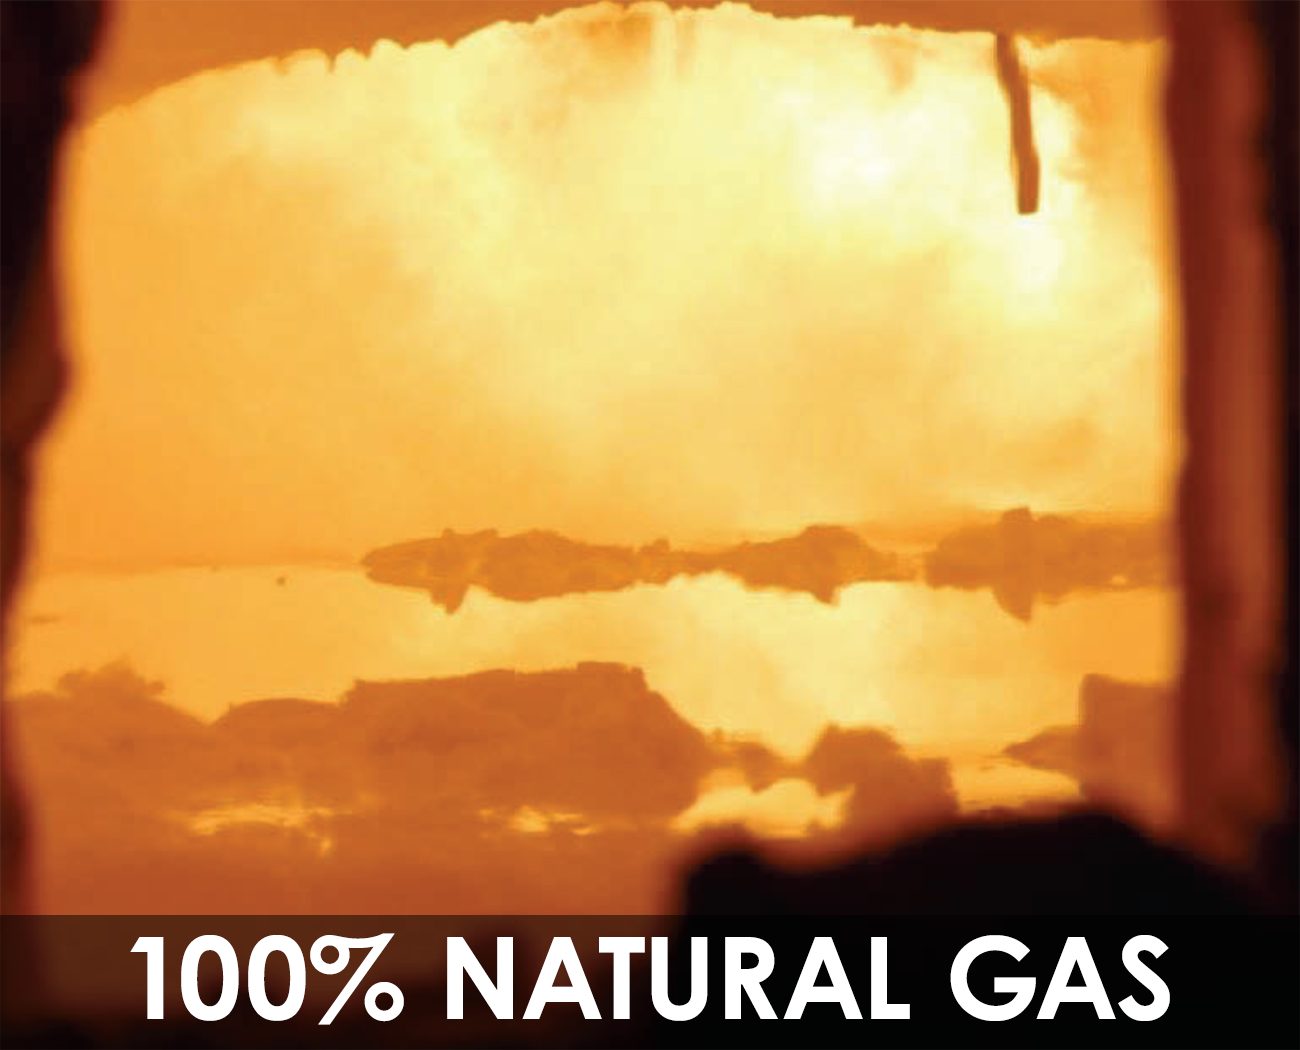 Glass melting trial, starting with 100% natural gas